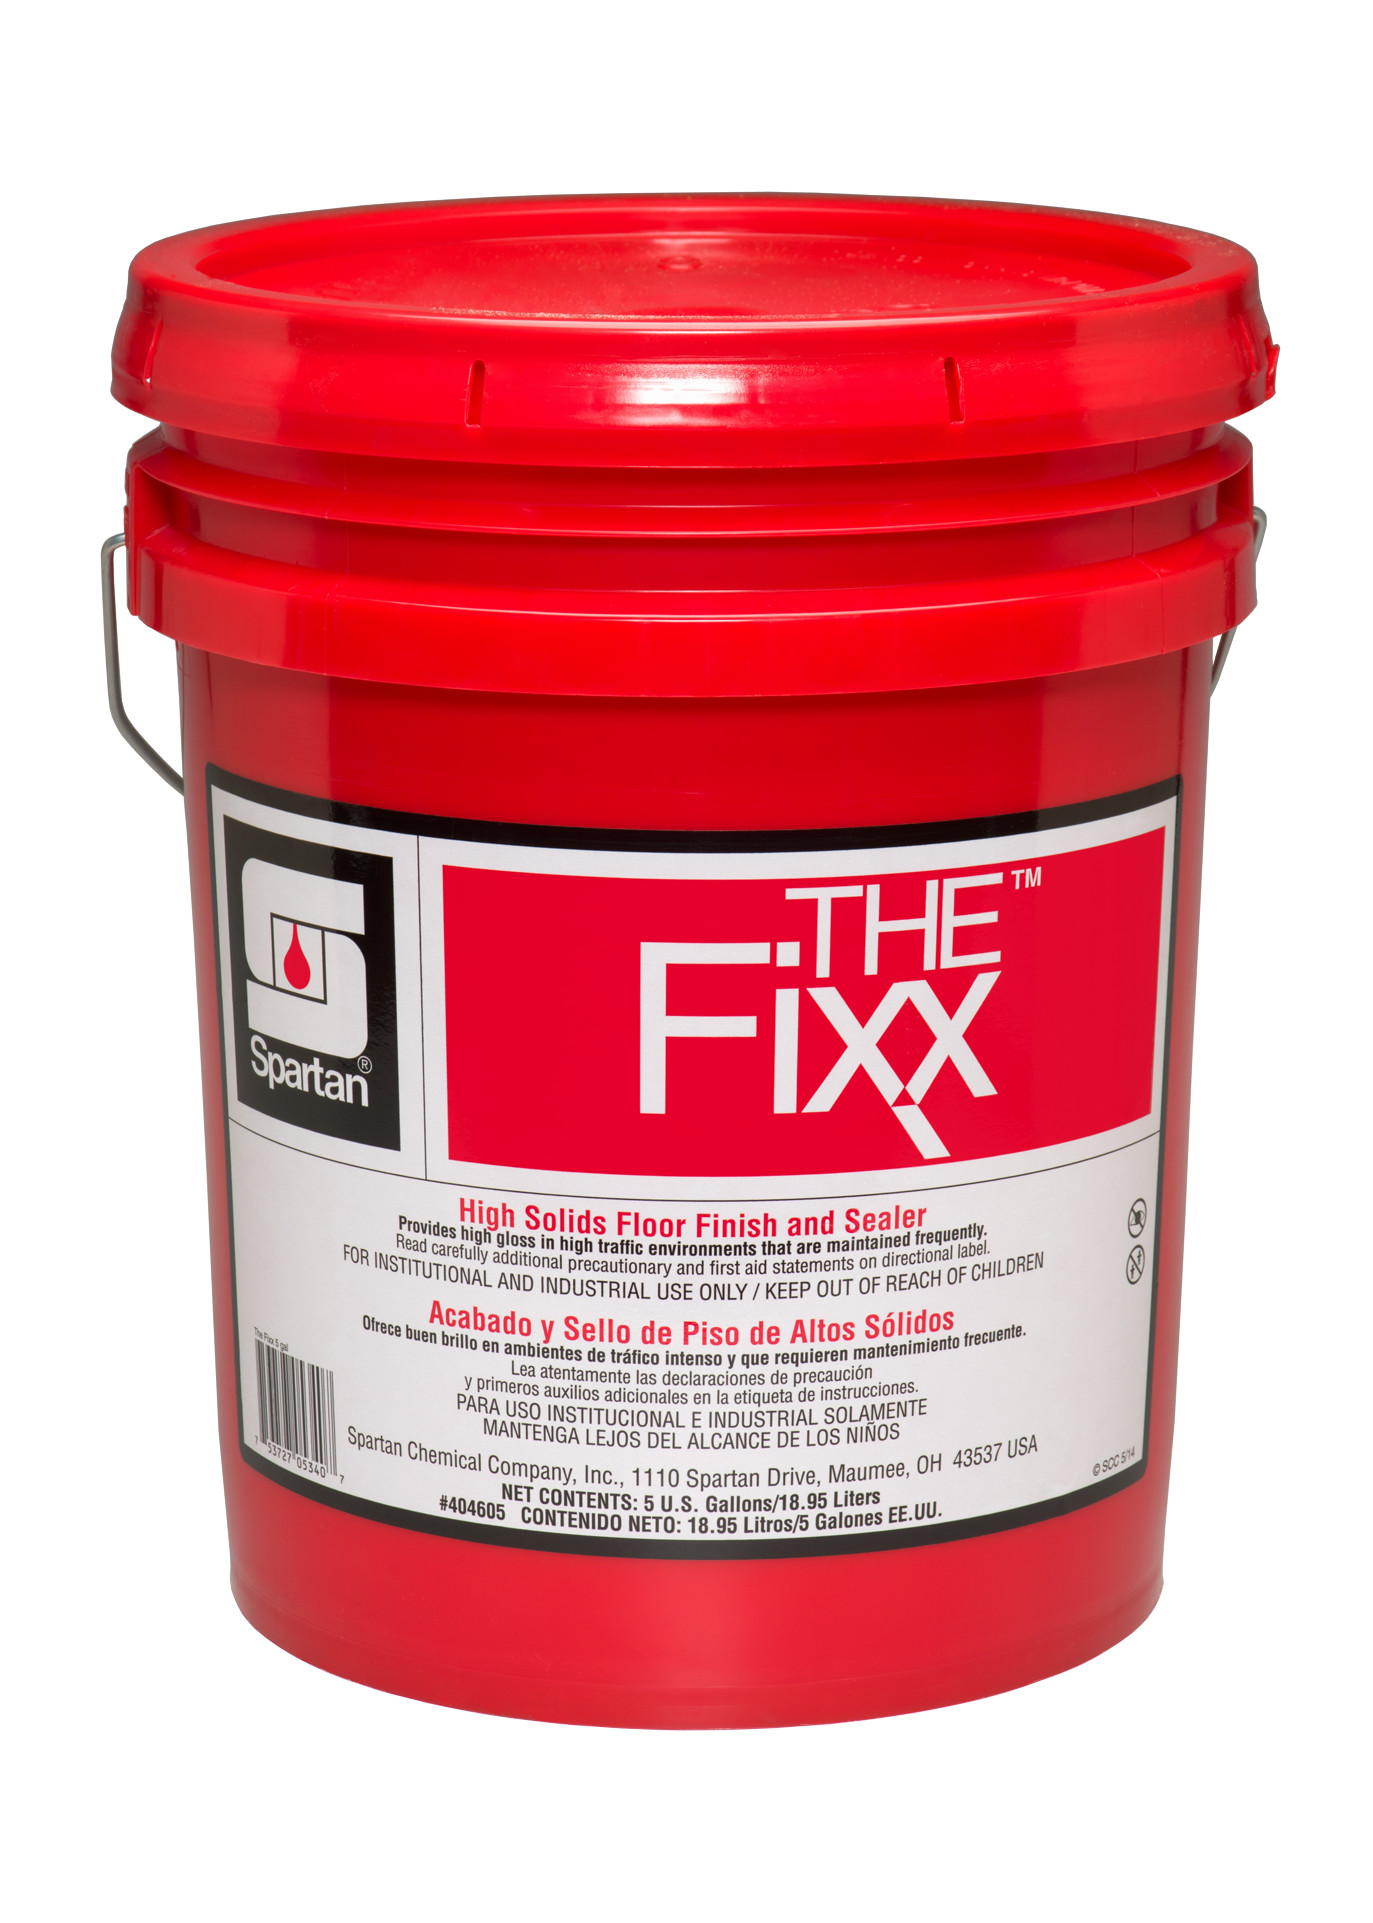 Spartan Chemical Company The Fixx, 5 GAL PAIL